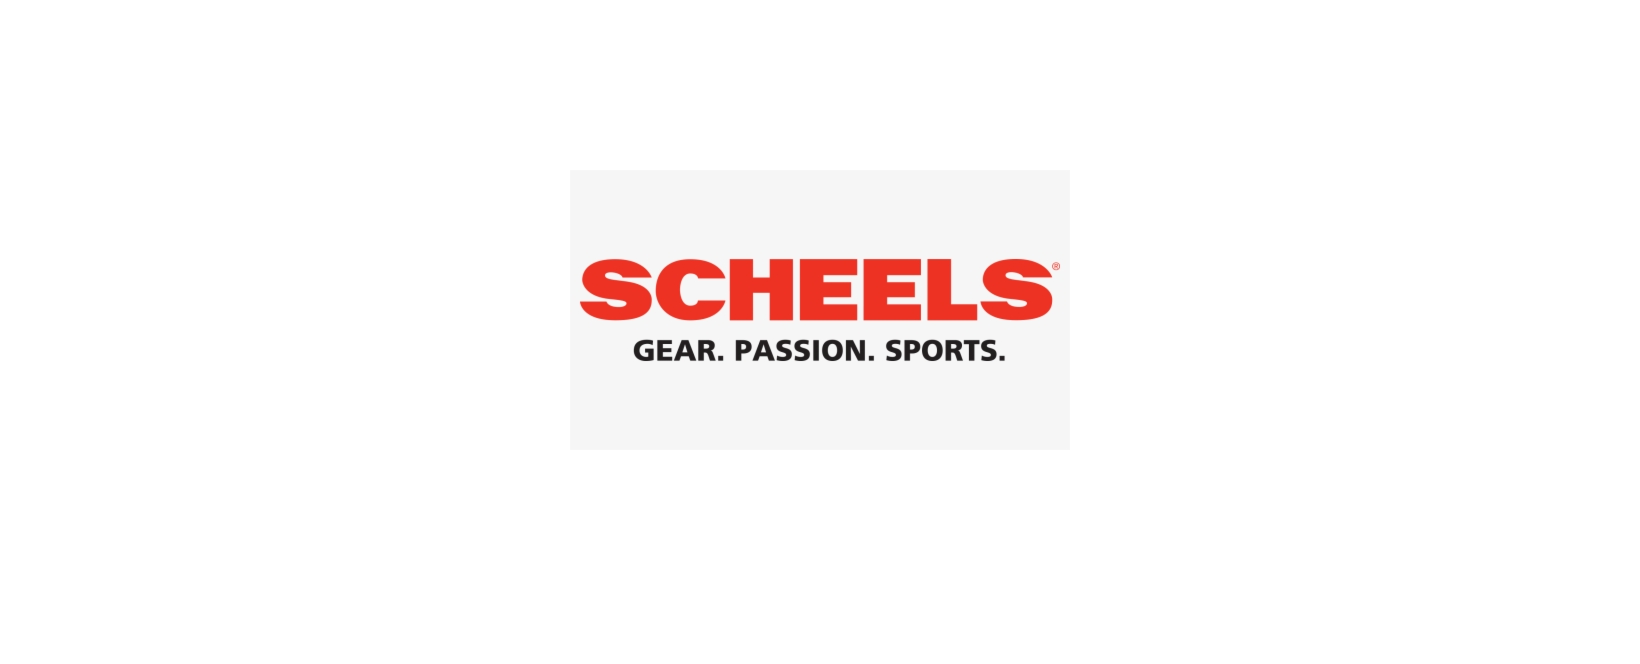 Scheels Review : Beyond the Sports Gear - A Fashion Destination for Active Lifestyles